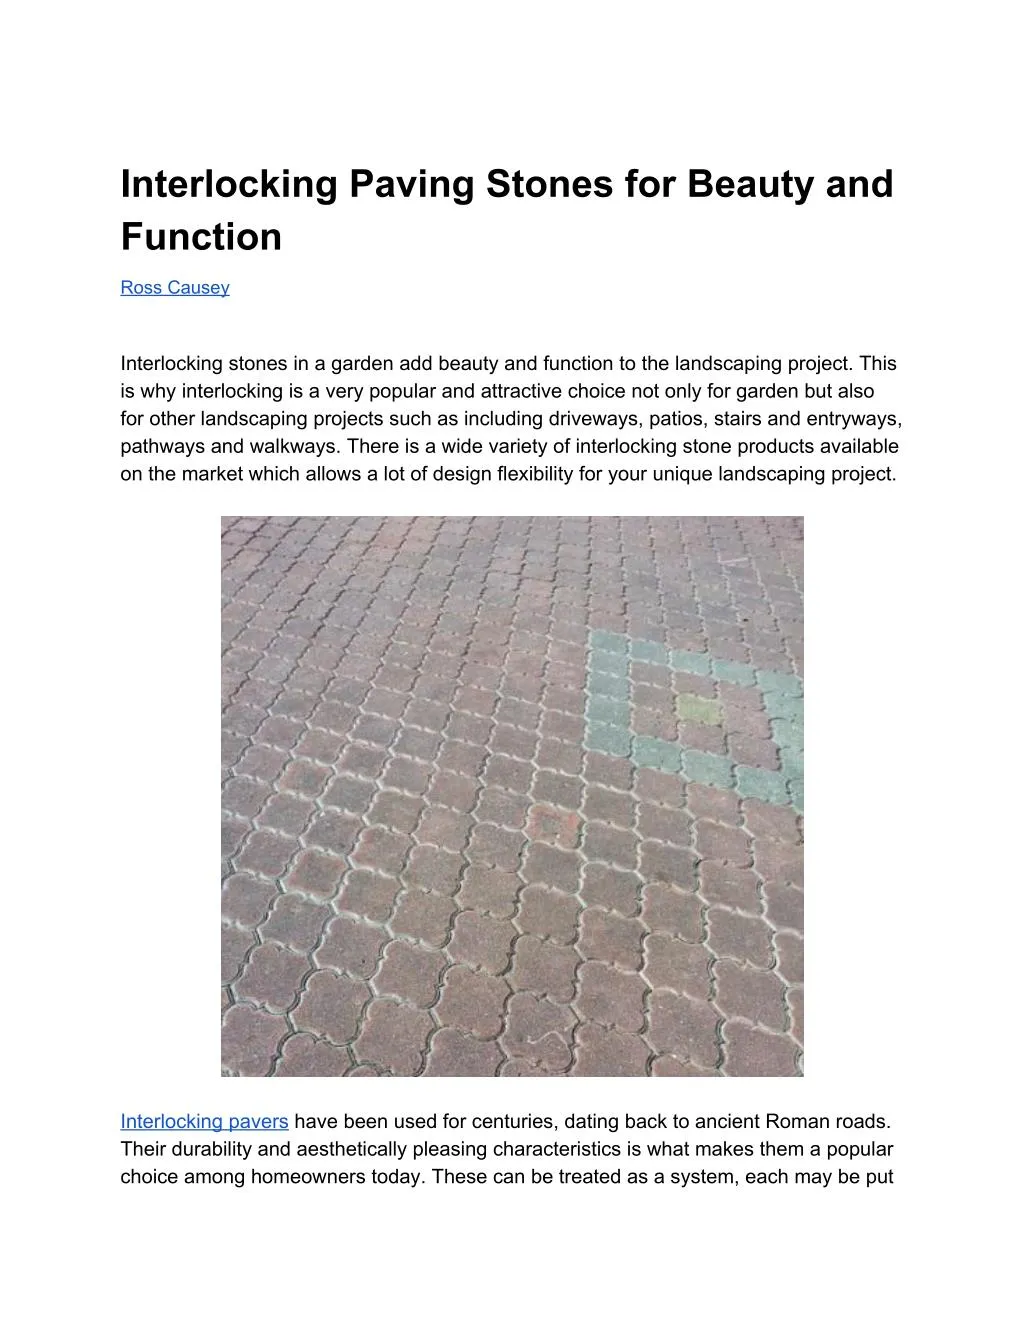 interlocking paving stones for beauty and function